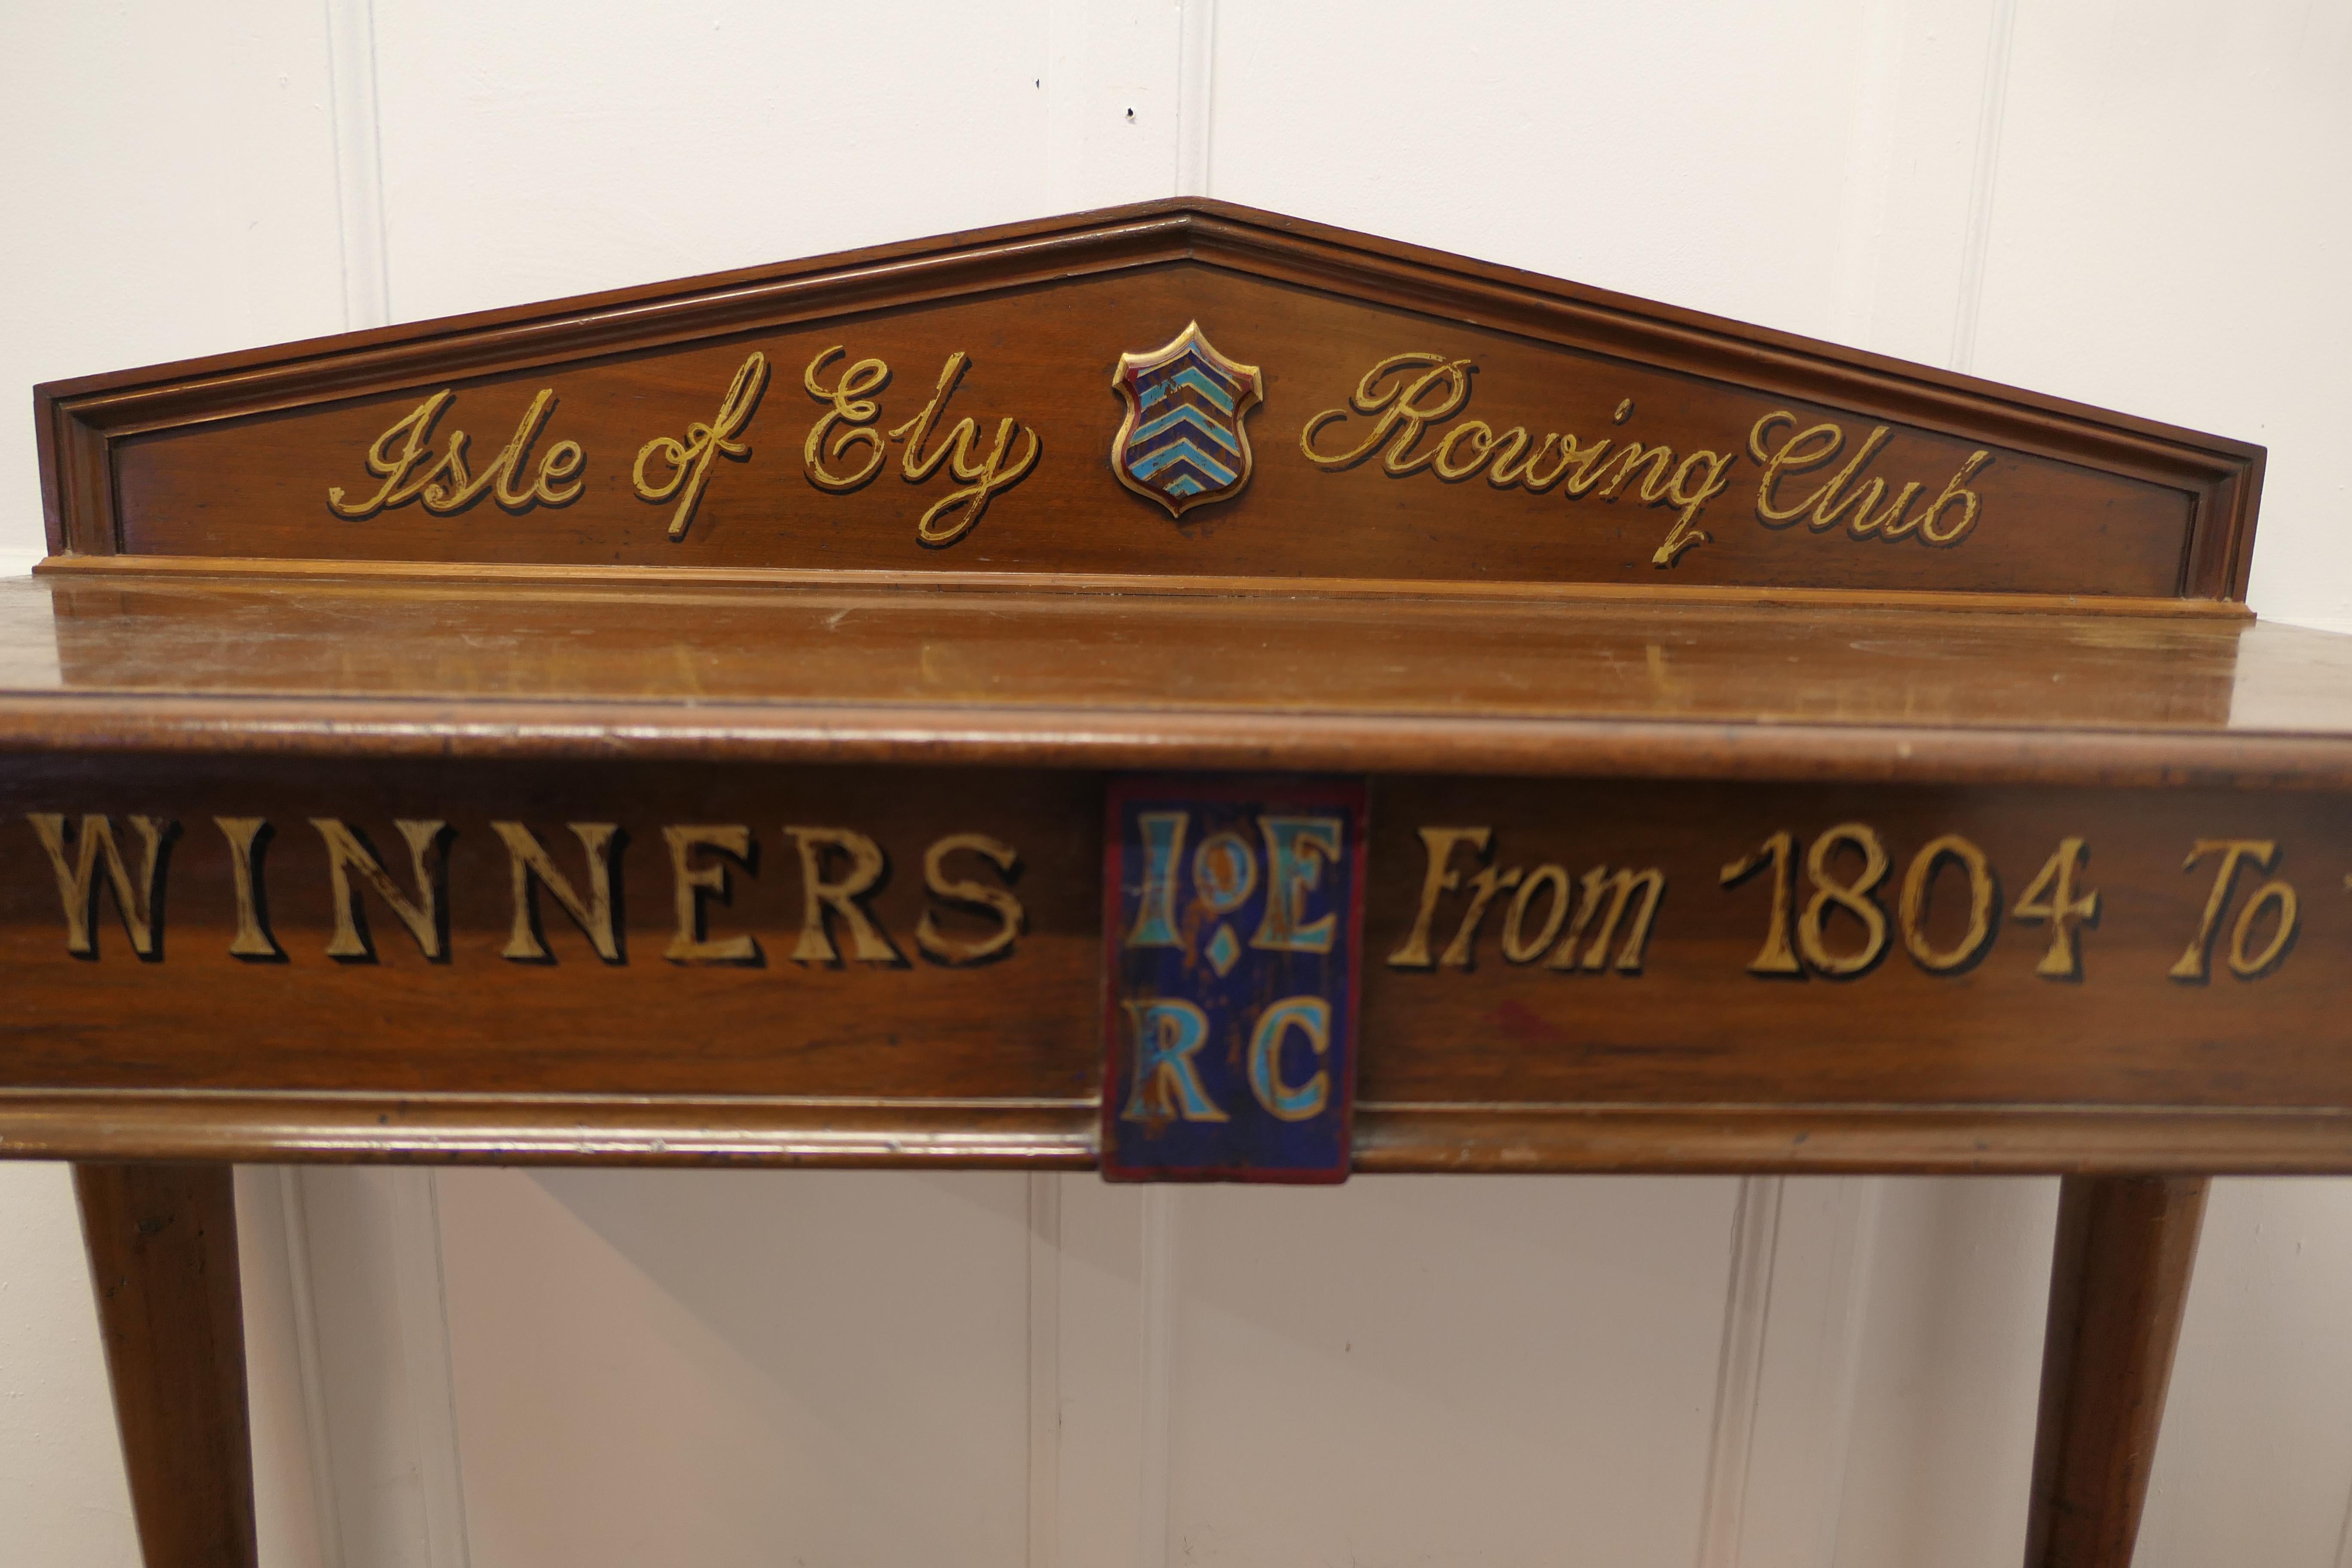 Rowing Club Trophy Table

A Victorian Side Table painted in the 20th Century for “The Isle of Ely” Rowing Club, commemorating the cup winners from 1804 to 1807

A Rare piece with a shield crest painted with chevrons, and gold lettering on the back